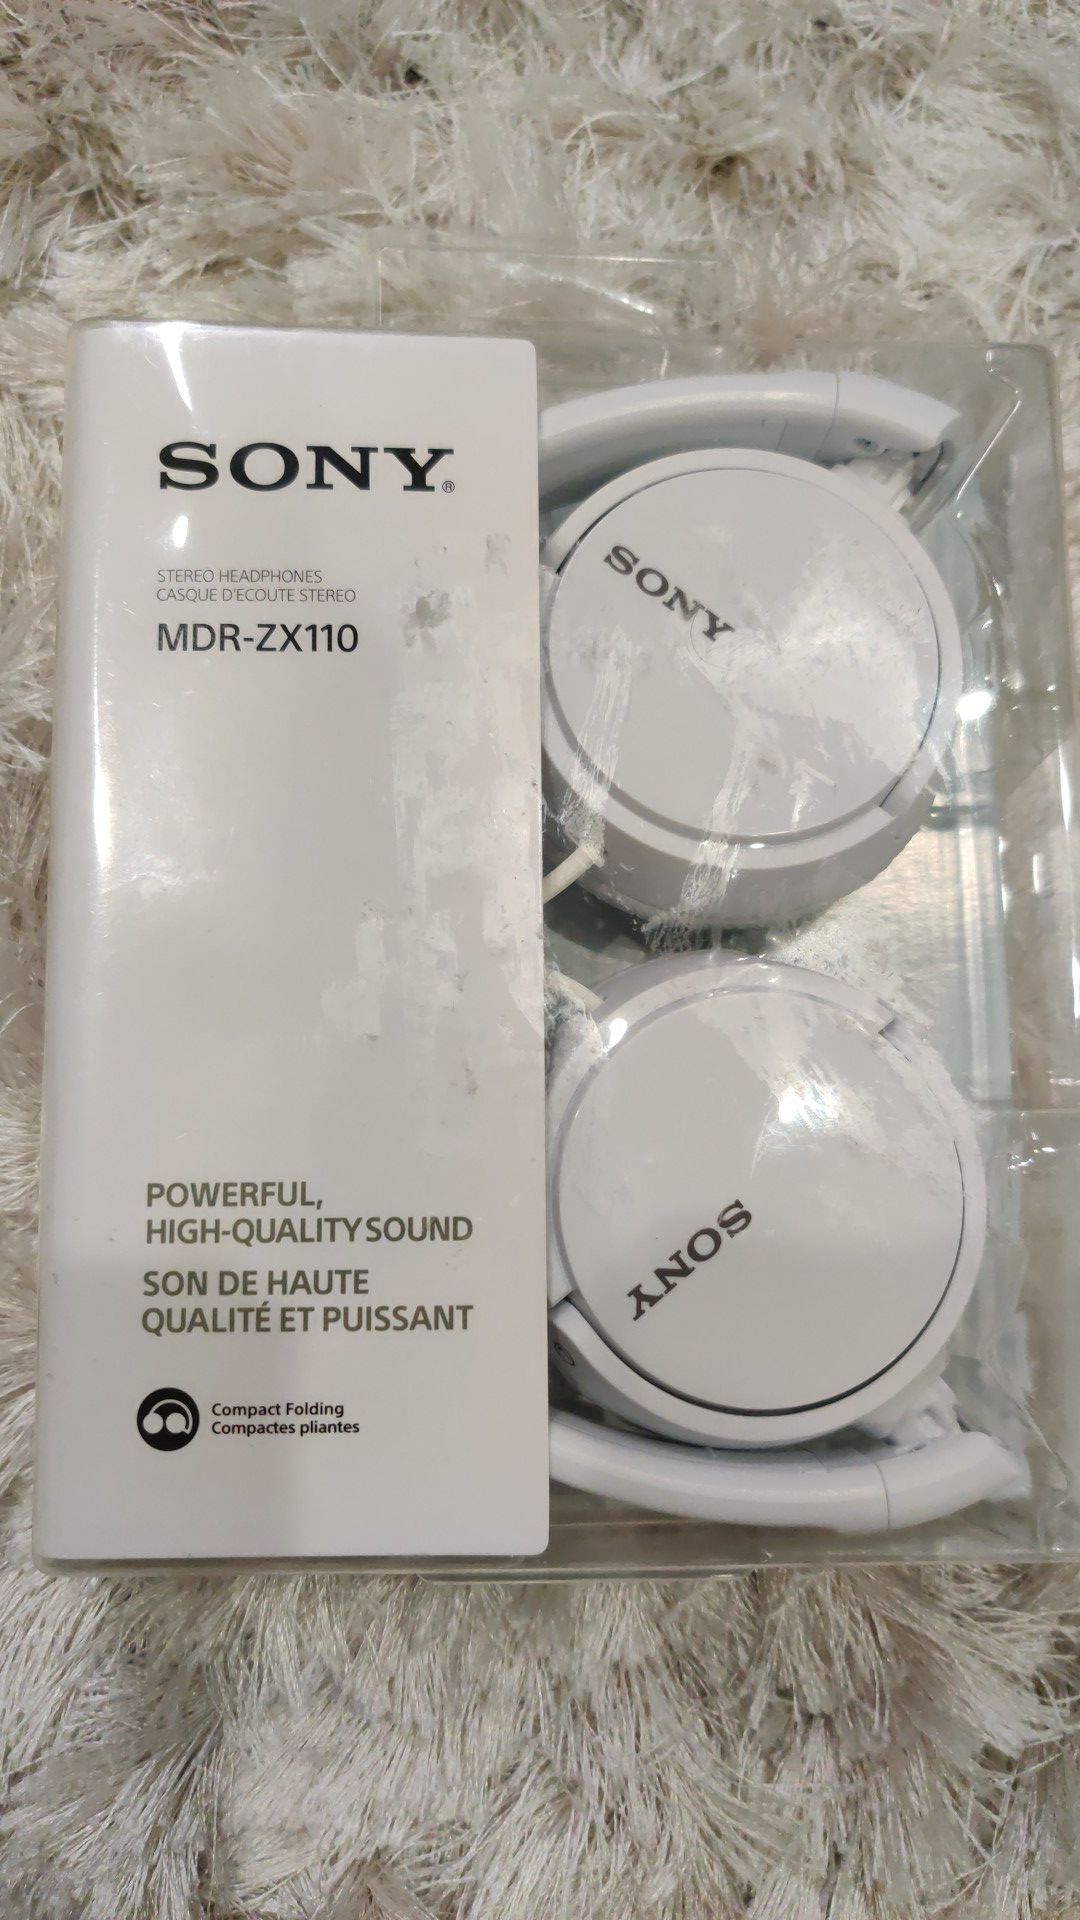 New Sony MDR-ZX110 Headphones